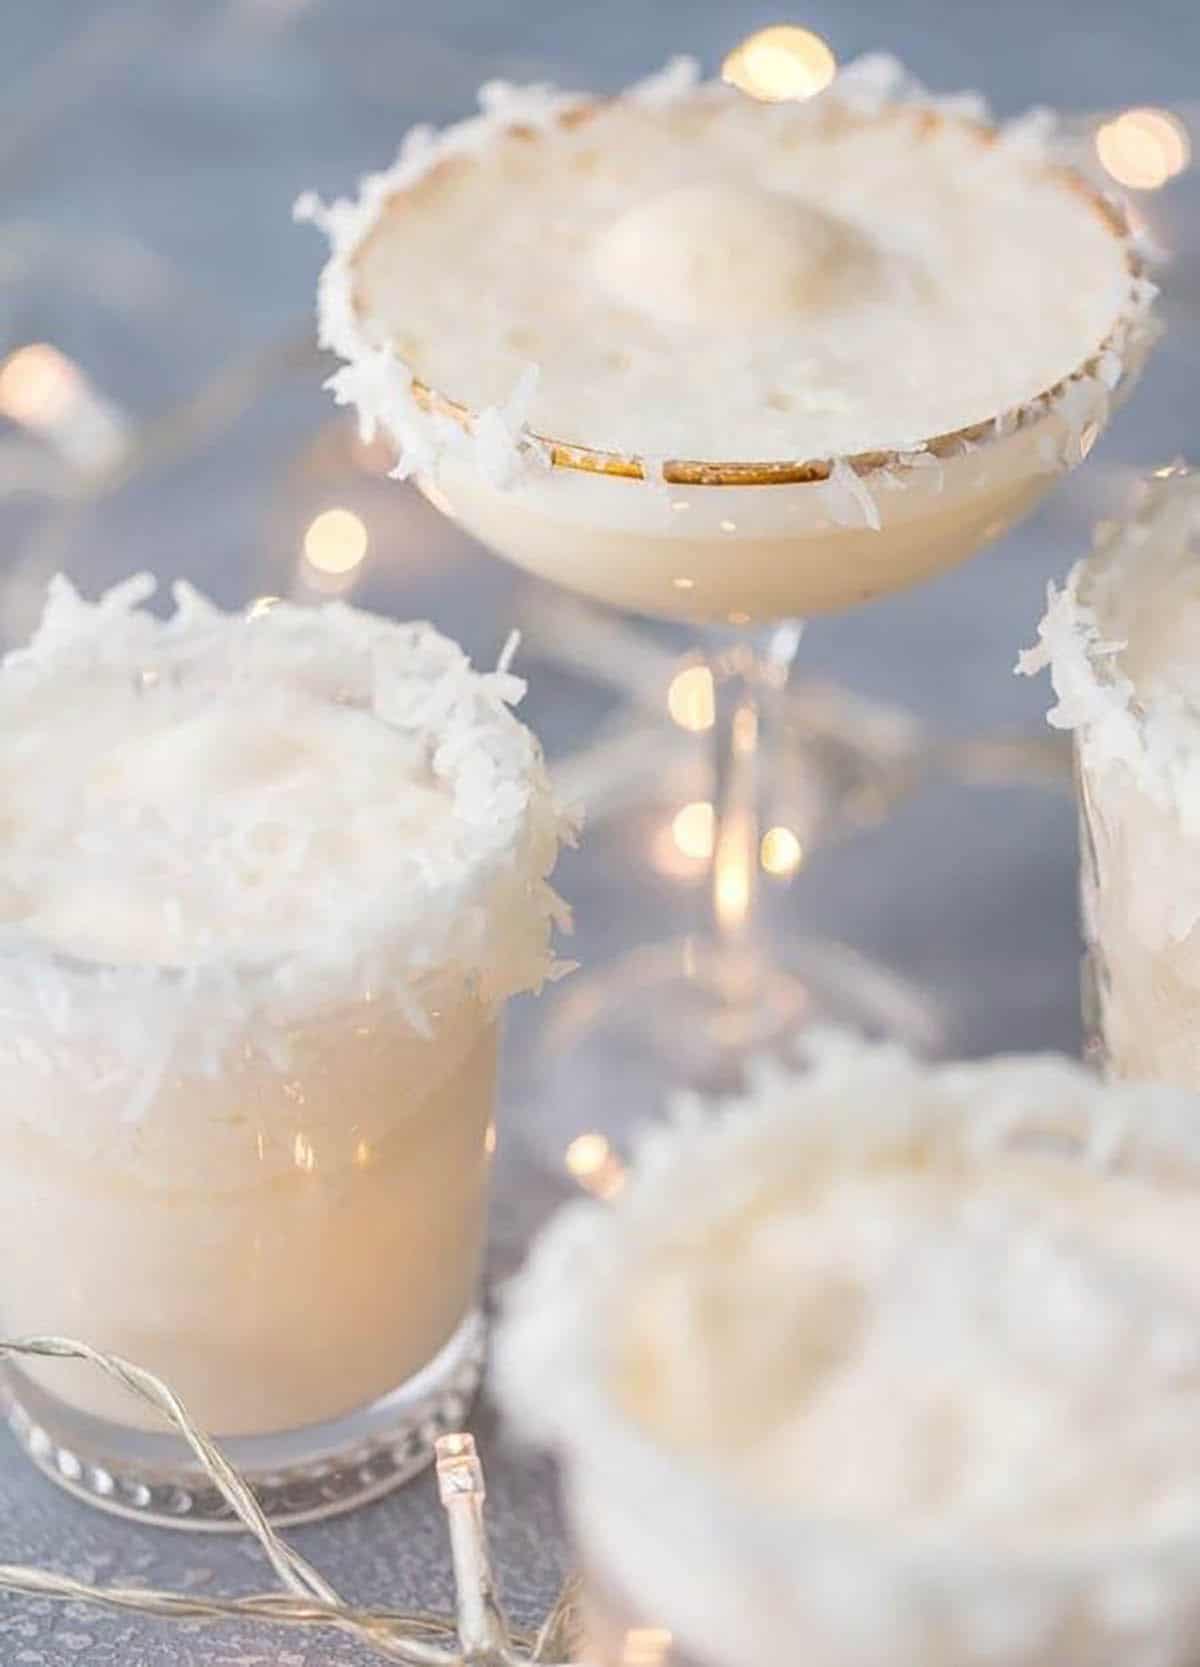 Festive Snow Punch (Non-Alcoholic Holiday Punch Recipe) topped with shredded coconut